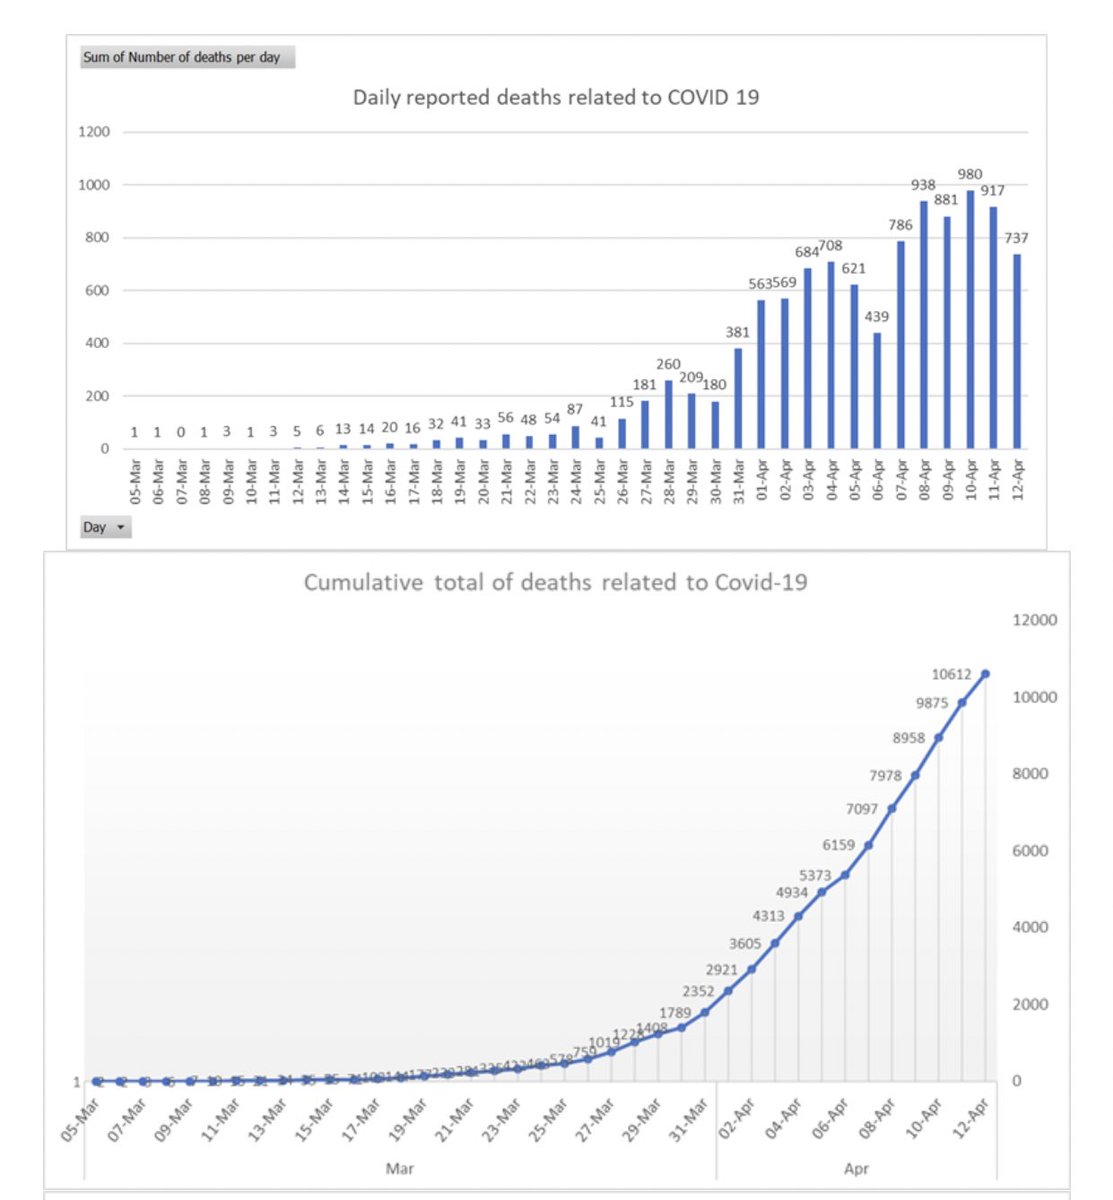 Daily data Apr 12 via  @IslaGlaister - 3 wks since lockdown. Since then UK recorded 10,277 deaths in hospitals alone + 77,629 cases- Slowdown in growth of deaths continues. 737 deaths to 10,612- Bank HoL ‘wknd effect’. Cld rise mid-week again. Figure doesn’t incl care homes 1/